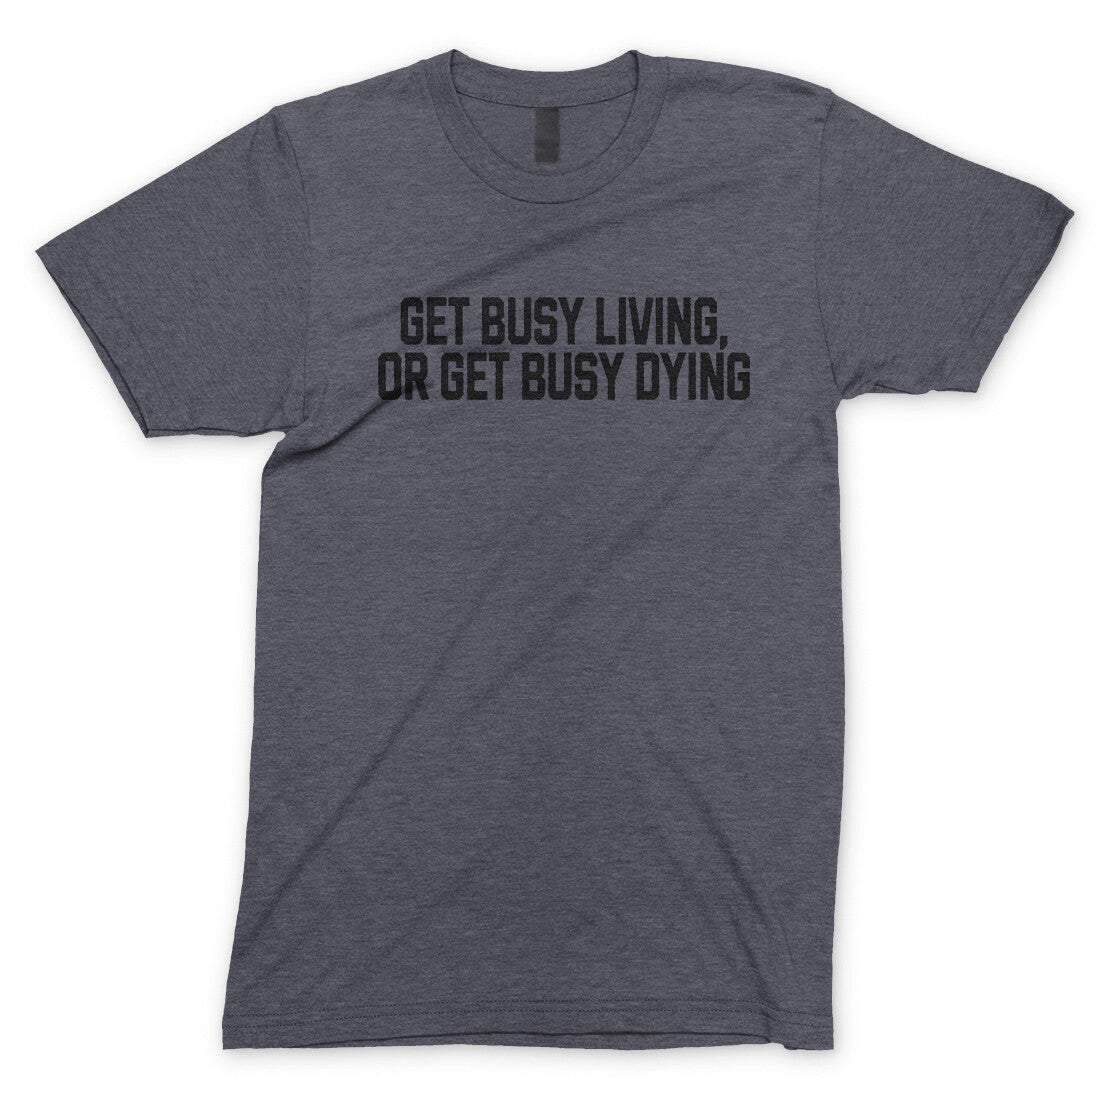 Get Busy Living or Get Busy Dying in Dark Heather Color